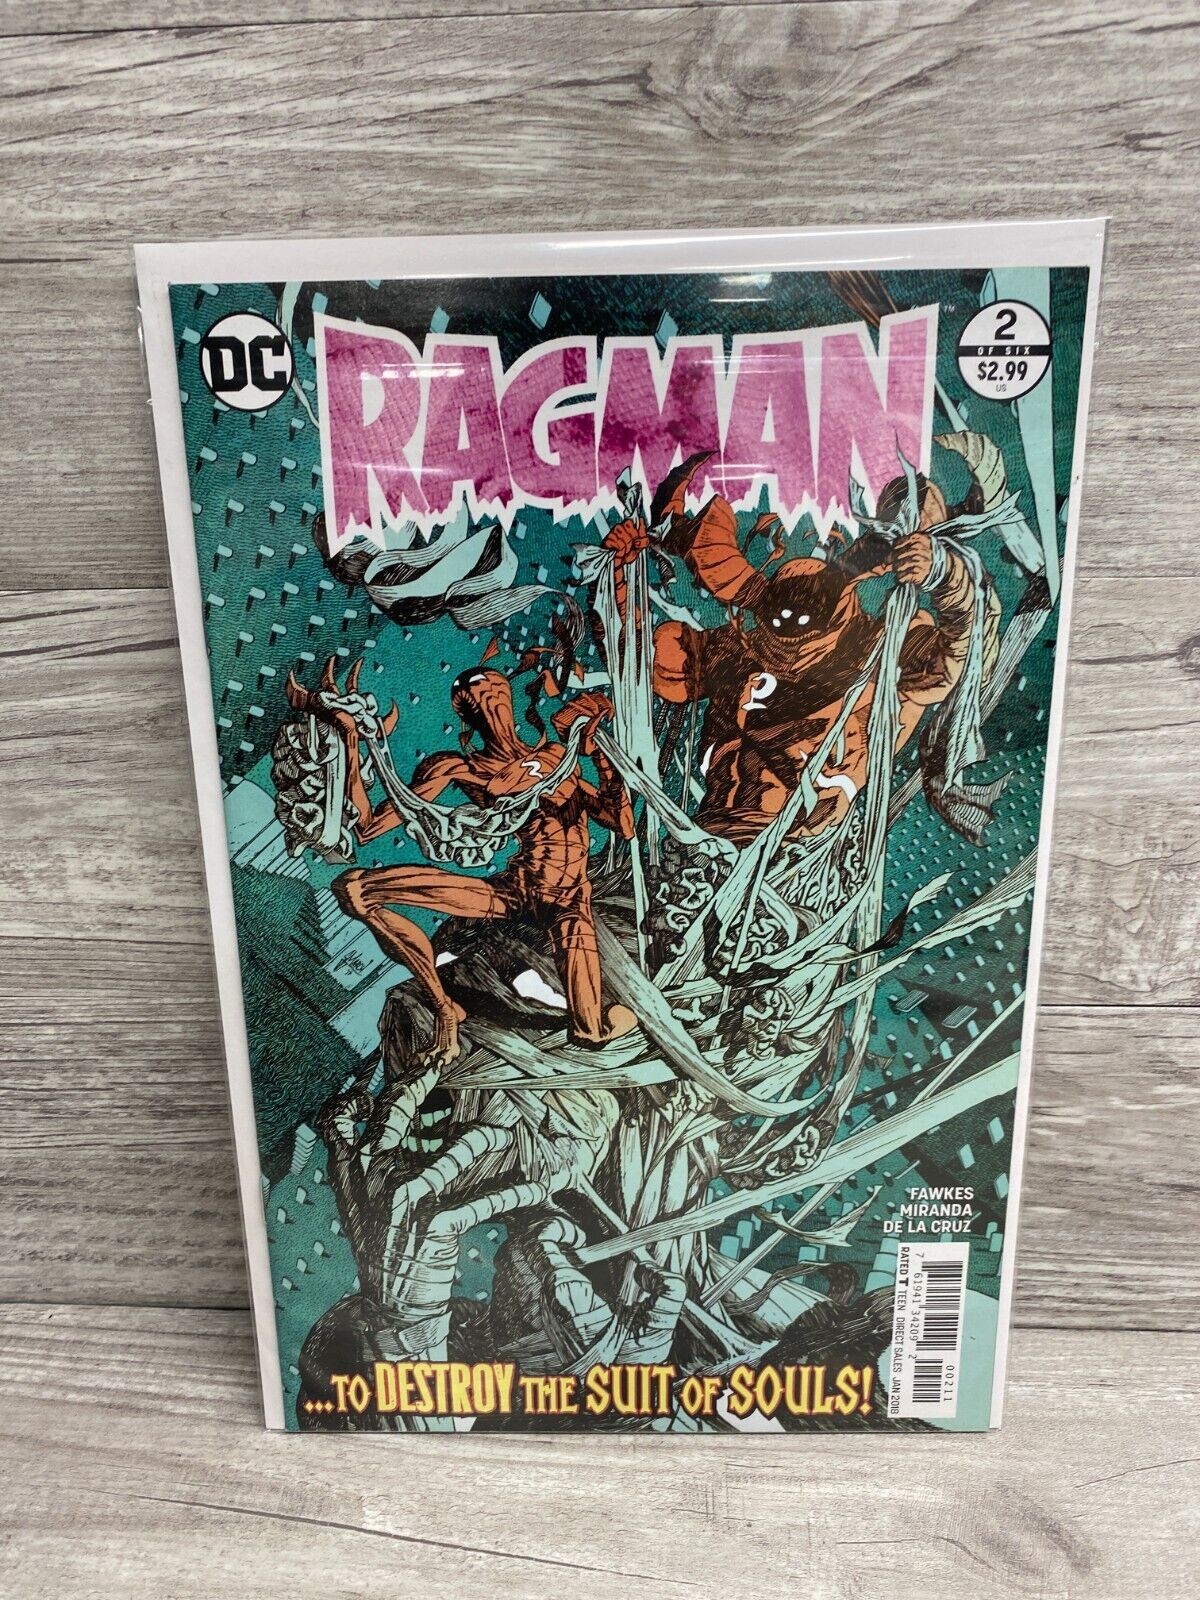 DC Comics Ragman -To Destroy The Suit of Souls #2 Modern Age January 2018